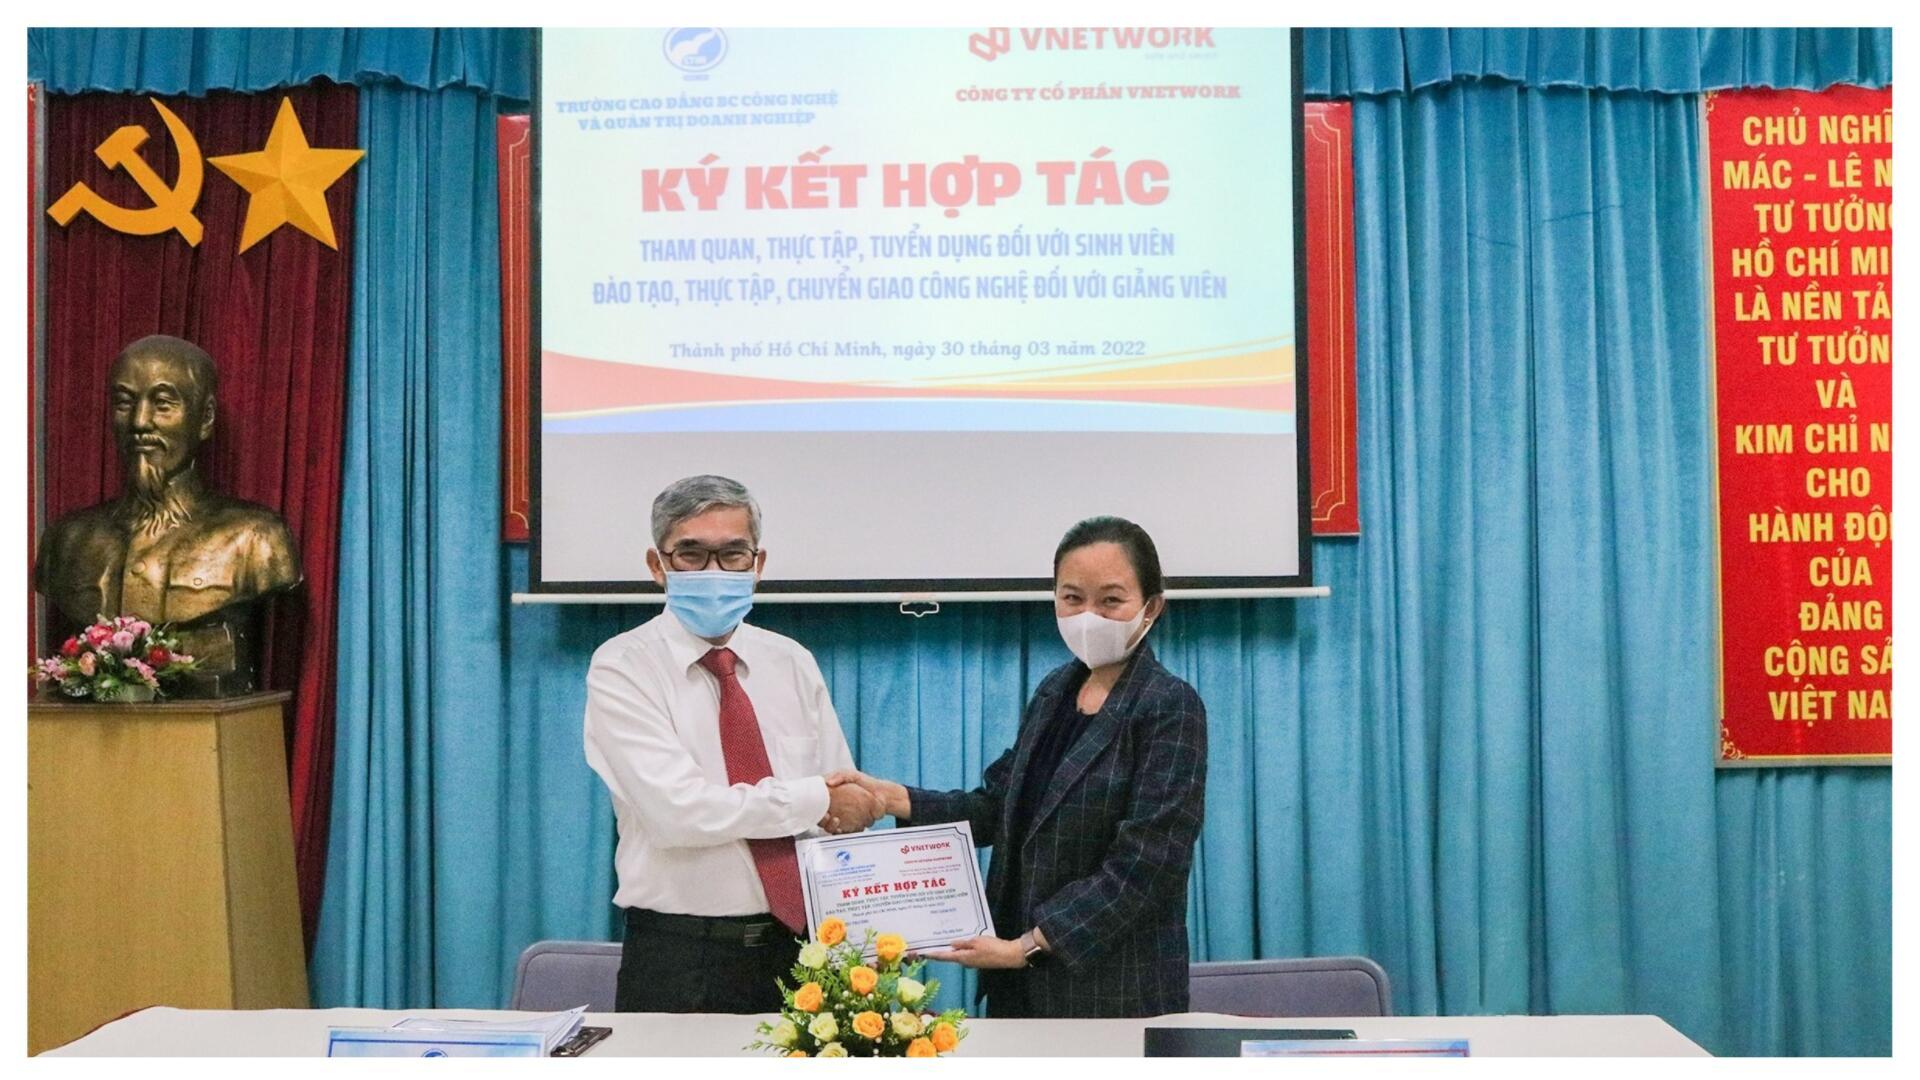 VNETWORK cooperation agreement with the College of Technology and Business Administration